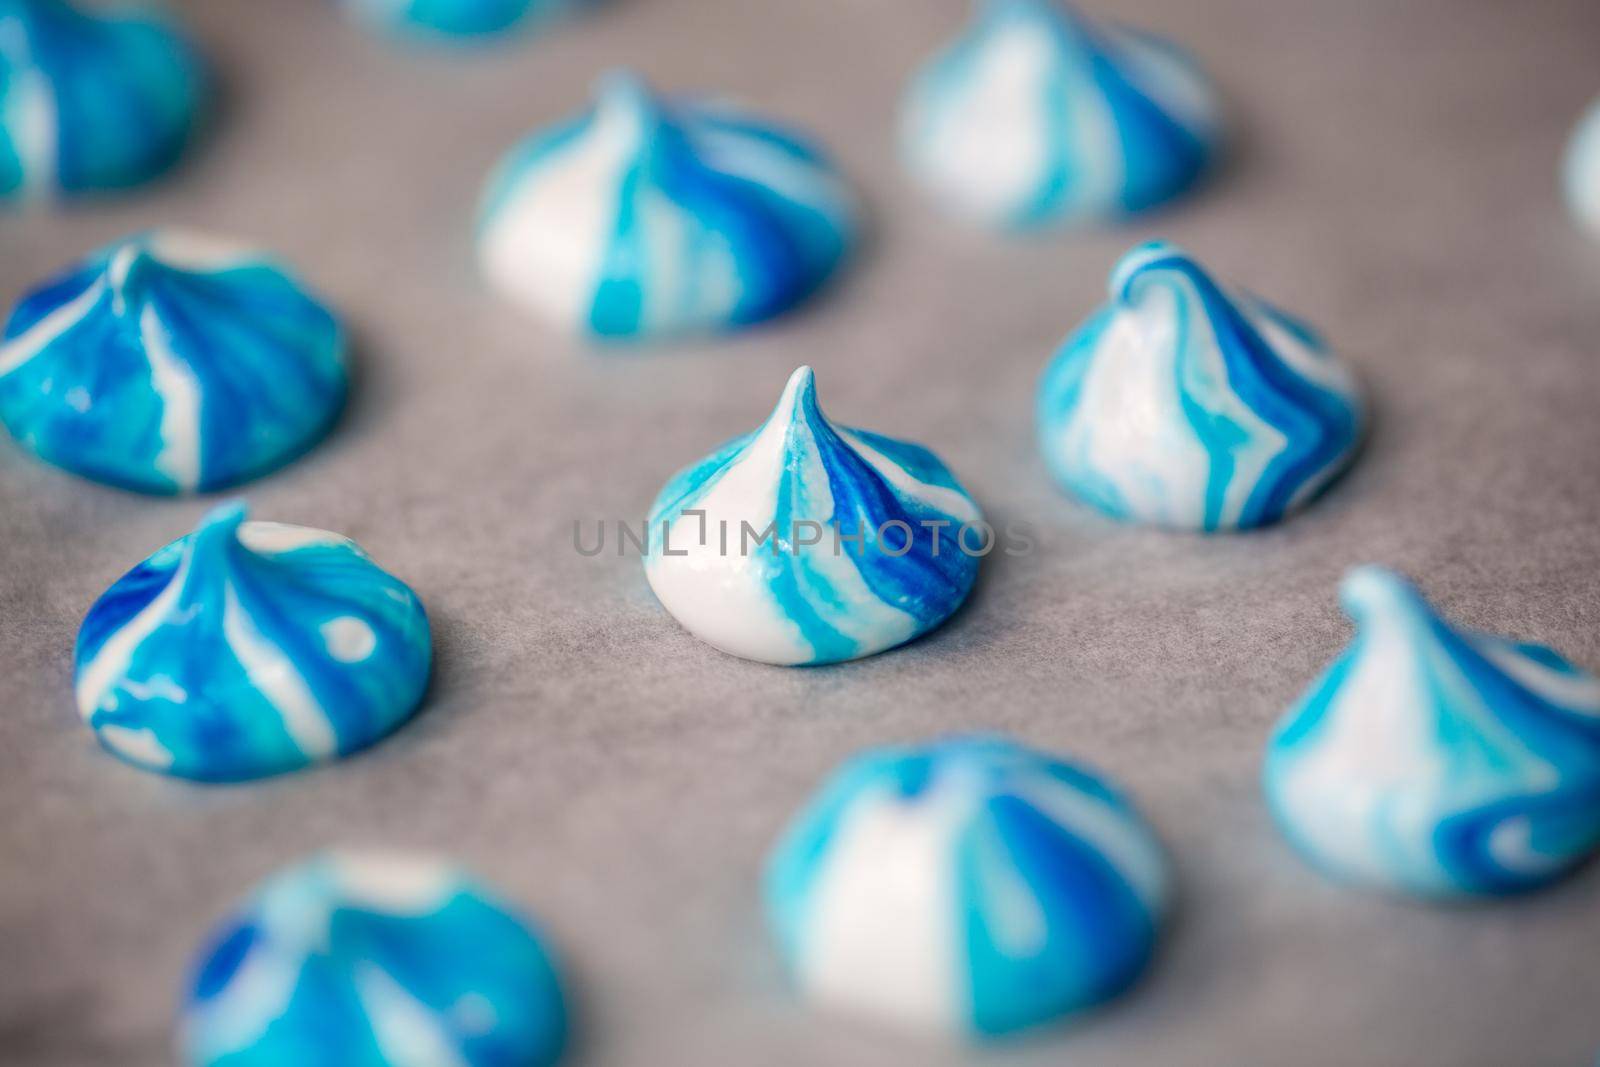 Meringue is a white and blue dessert on parchment by StudioPeace